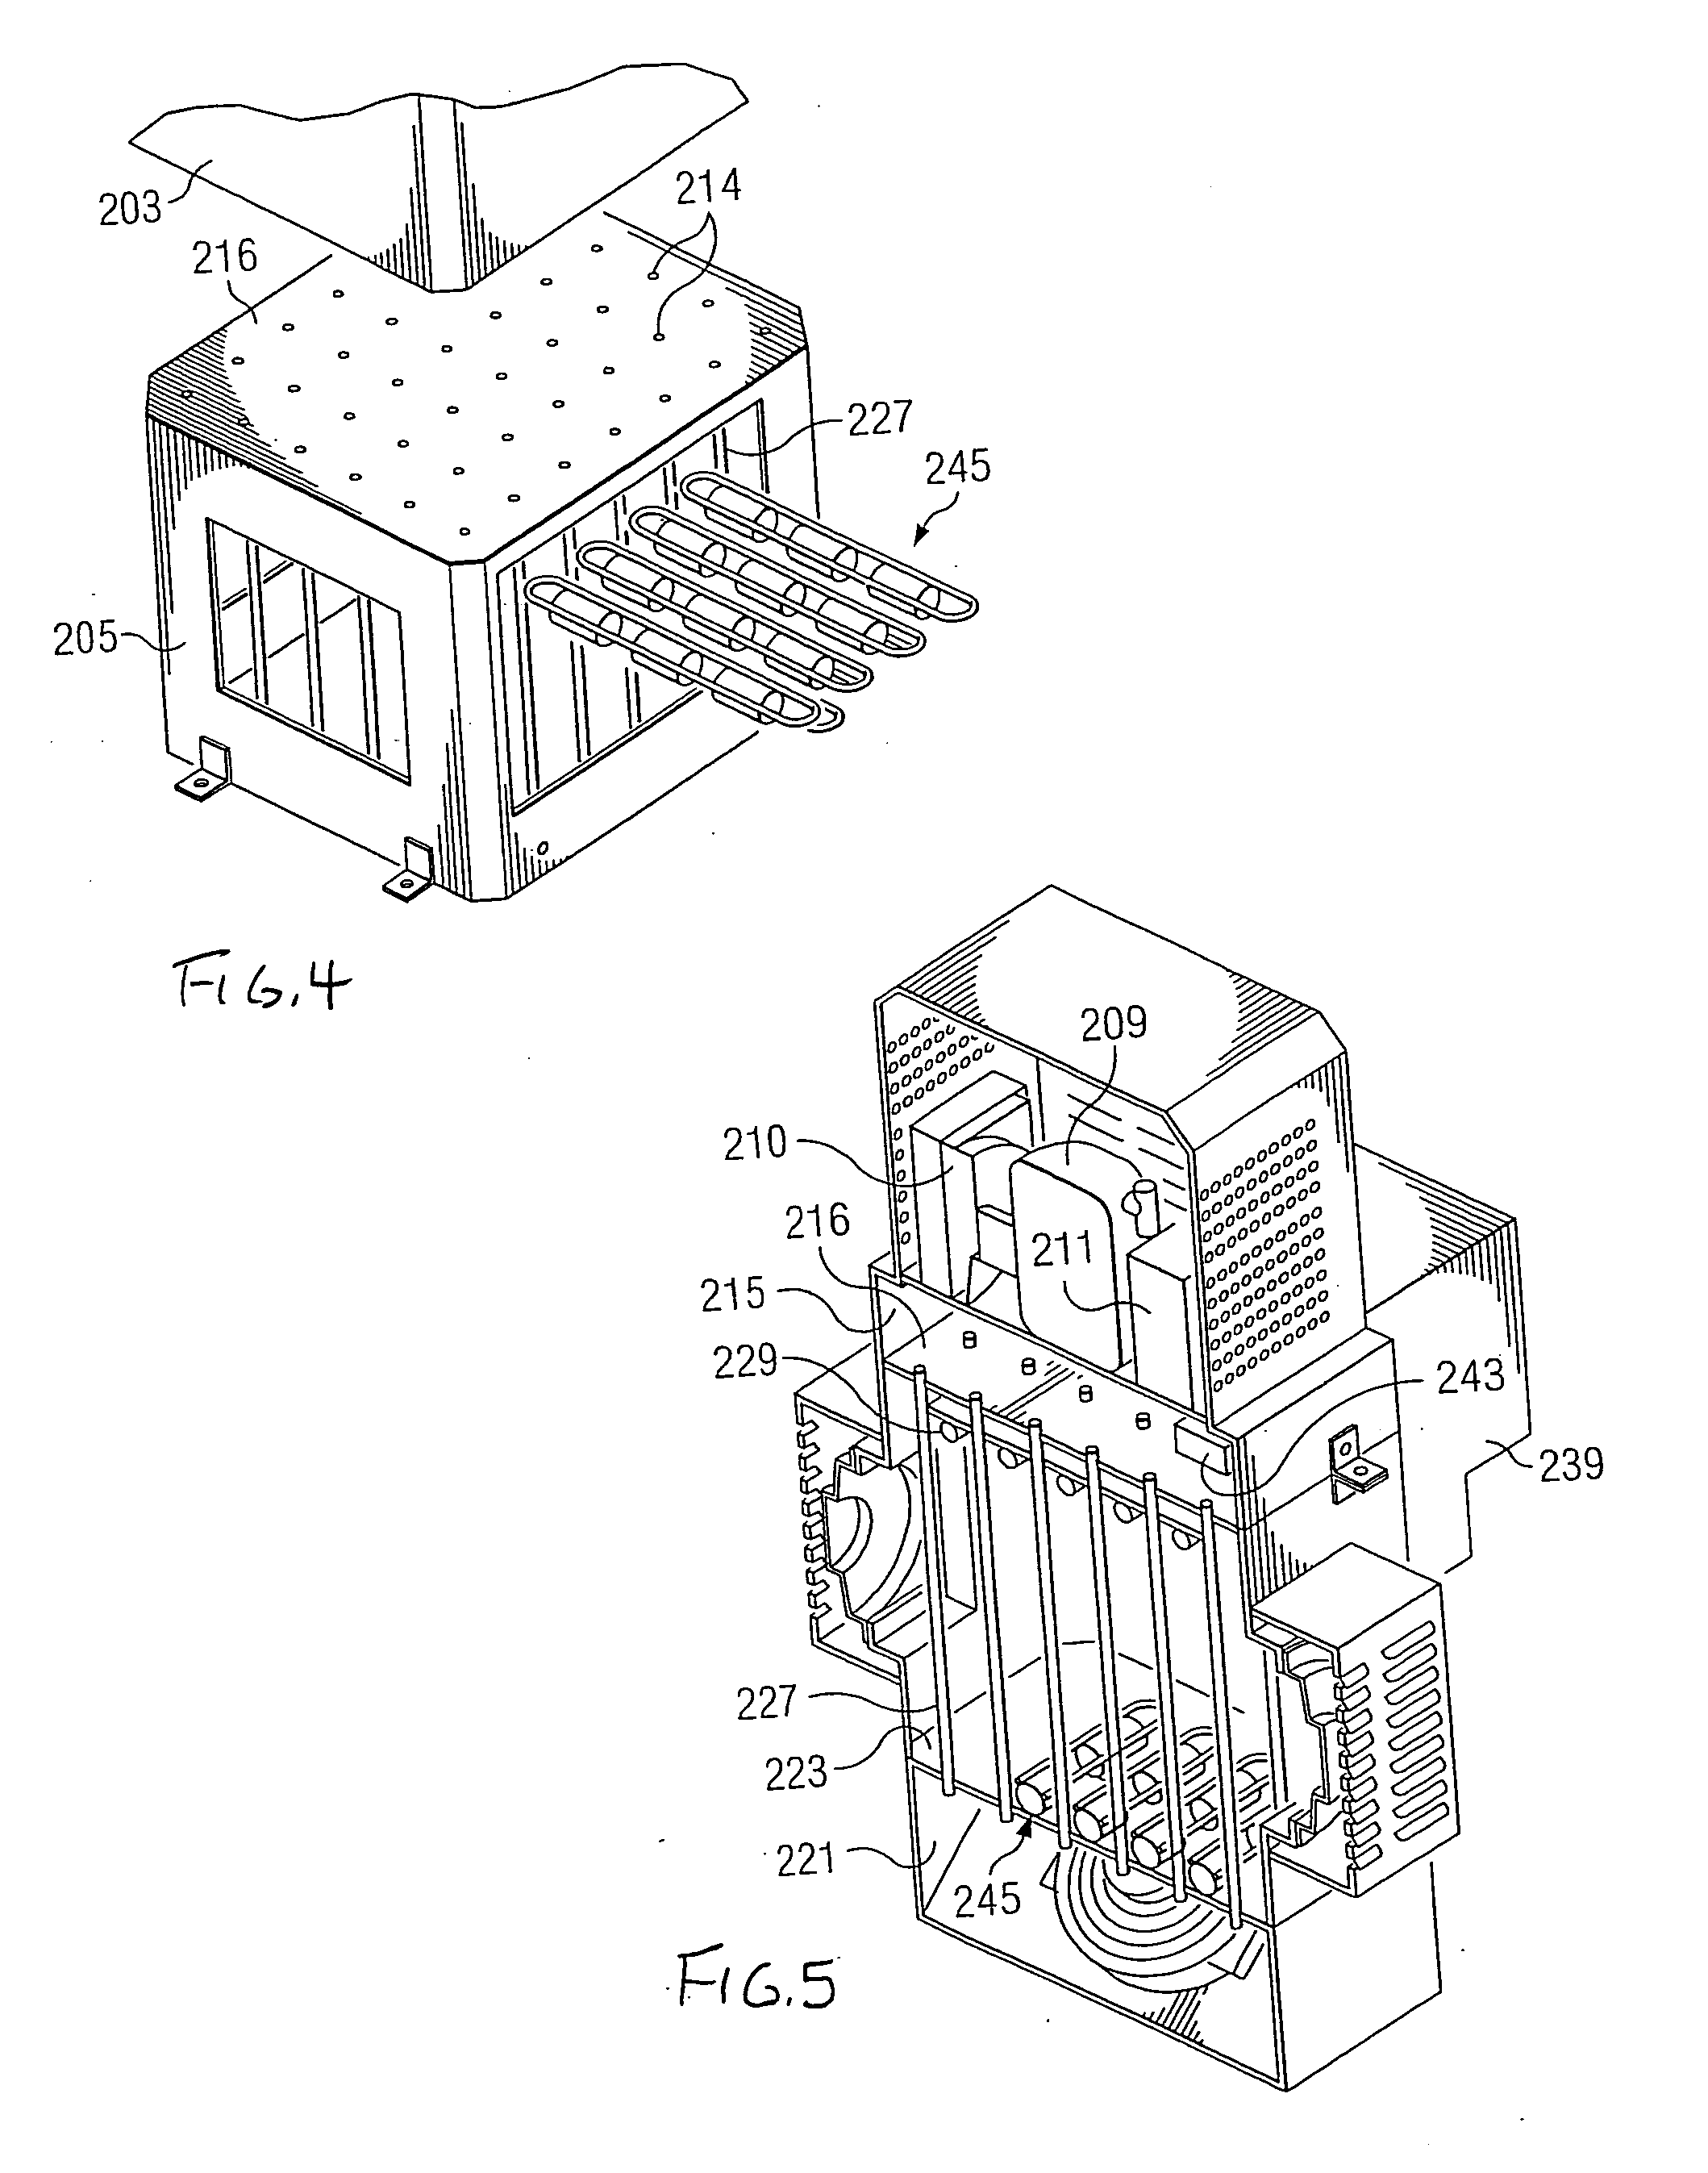 Method and apparatus for generating drinking water by condensing air humidity